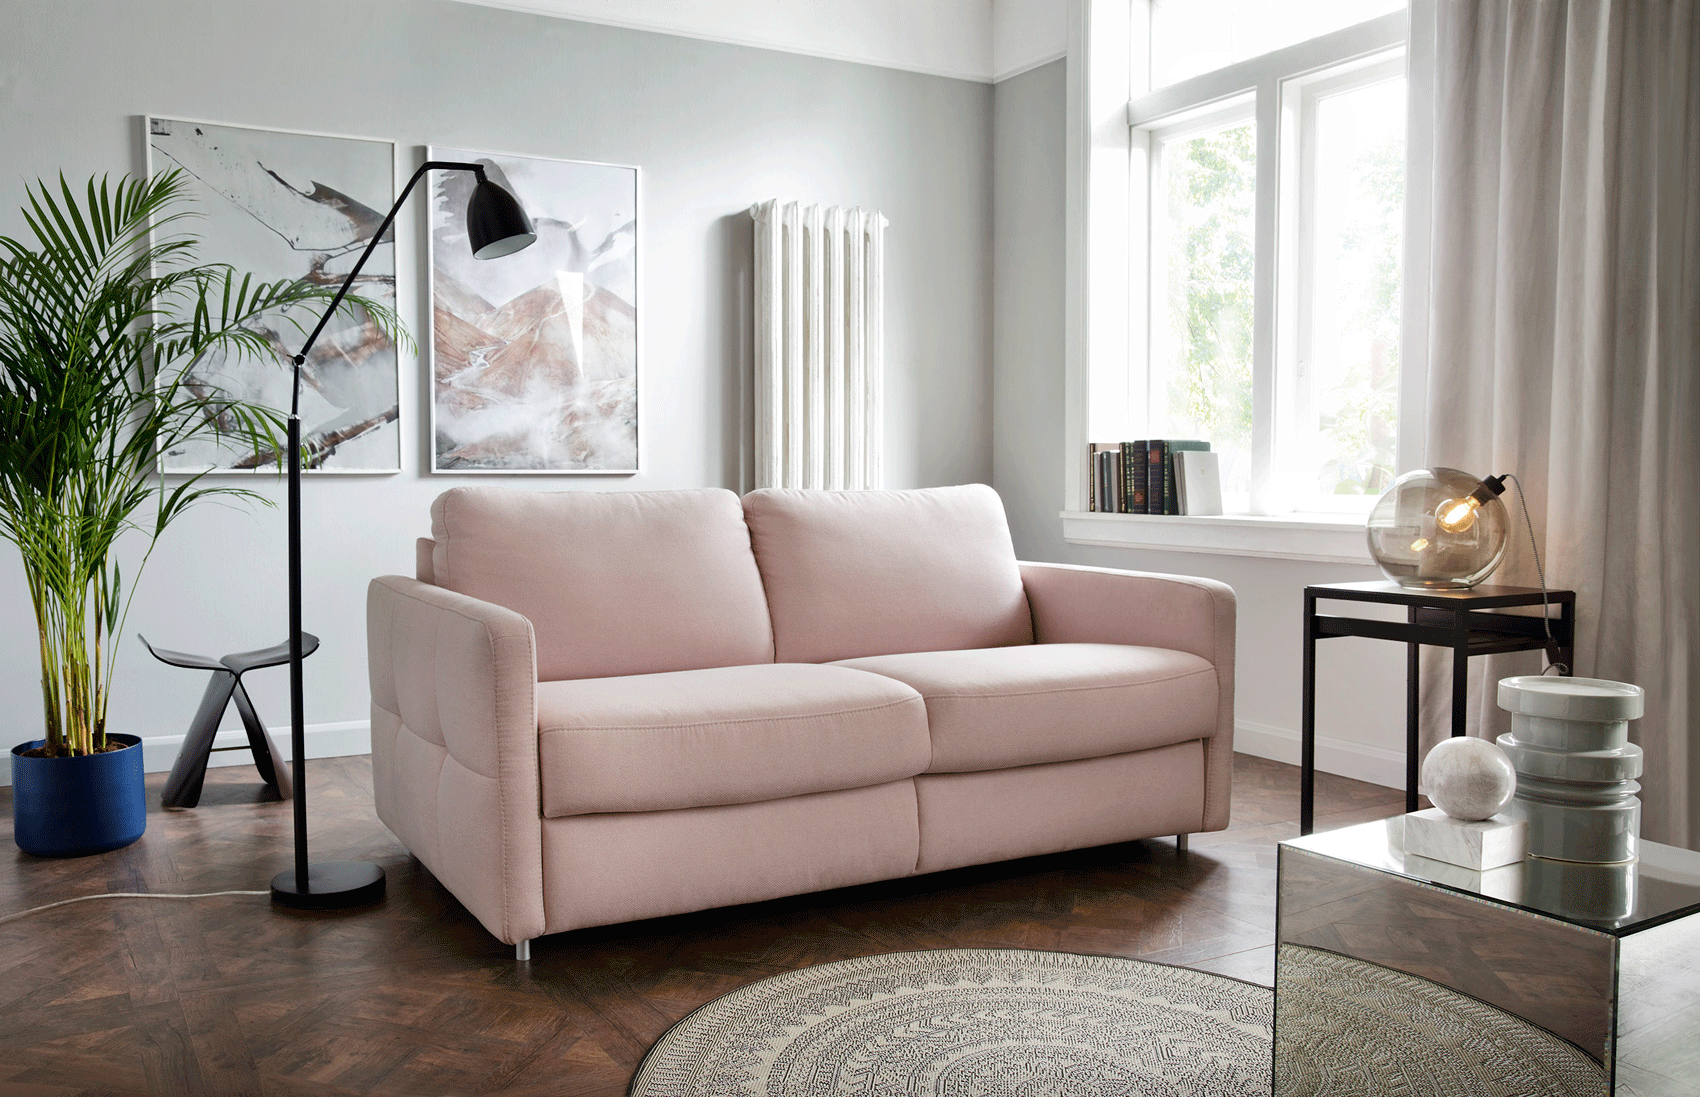 Brands Arredoclassic Living Room, Italy Ema Sofa Bed